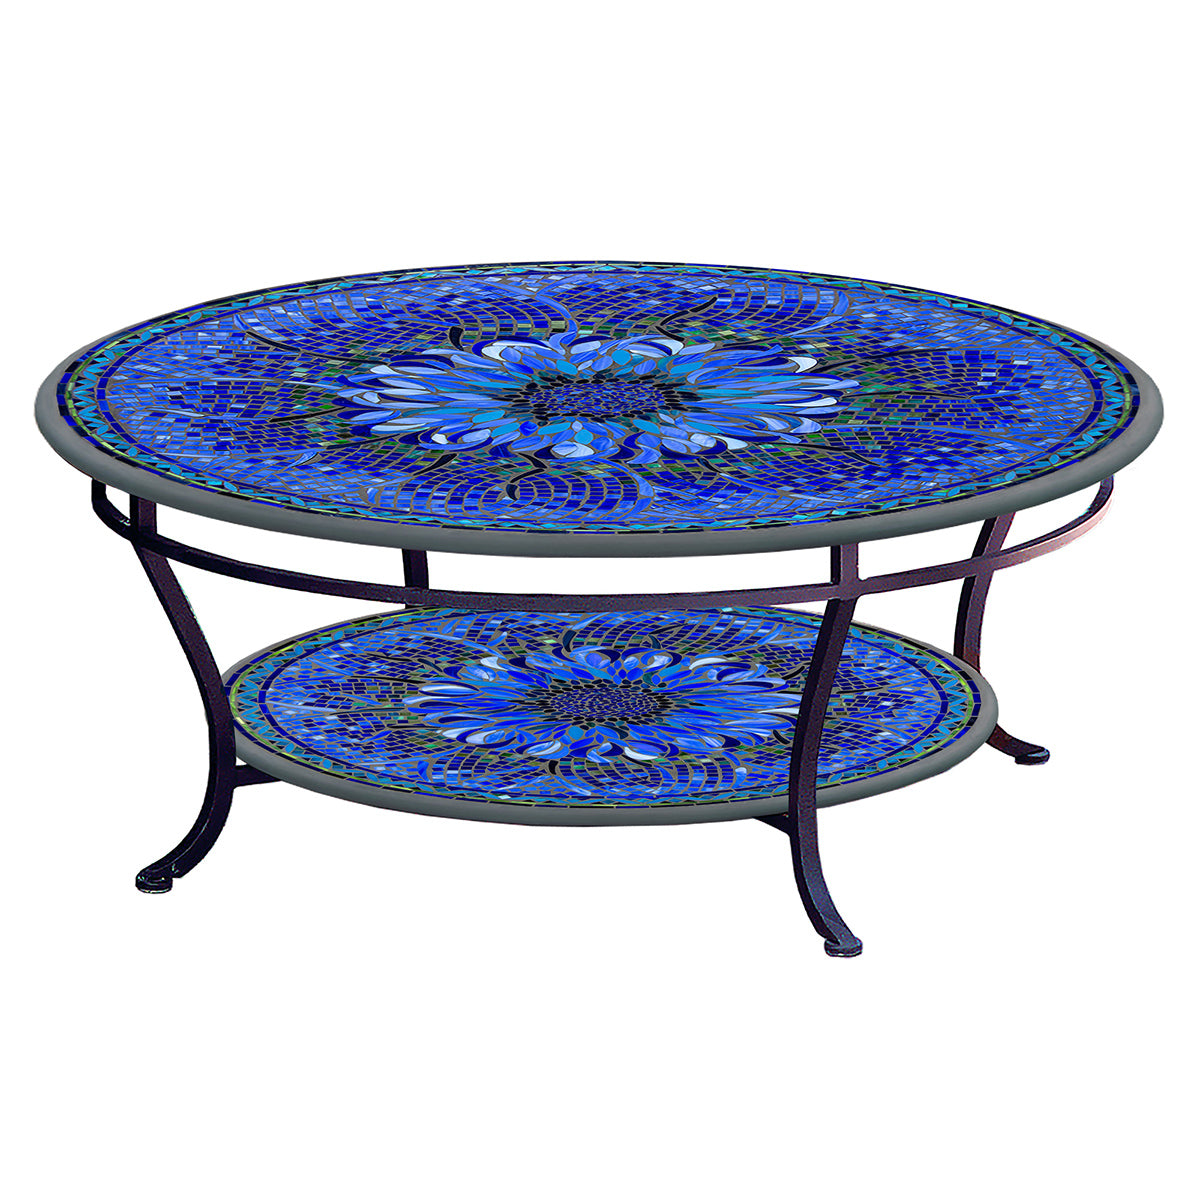 Bella Bloom Mosaic Coffee Table - Tiered-Iron Accents